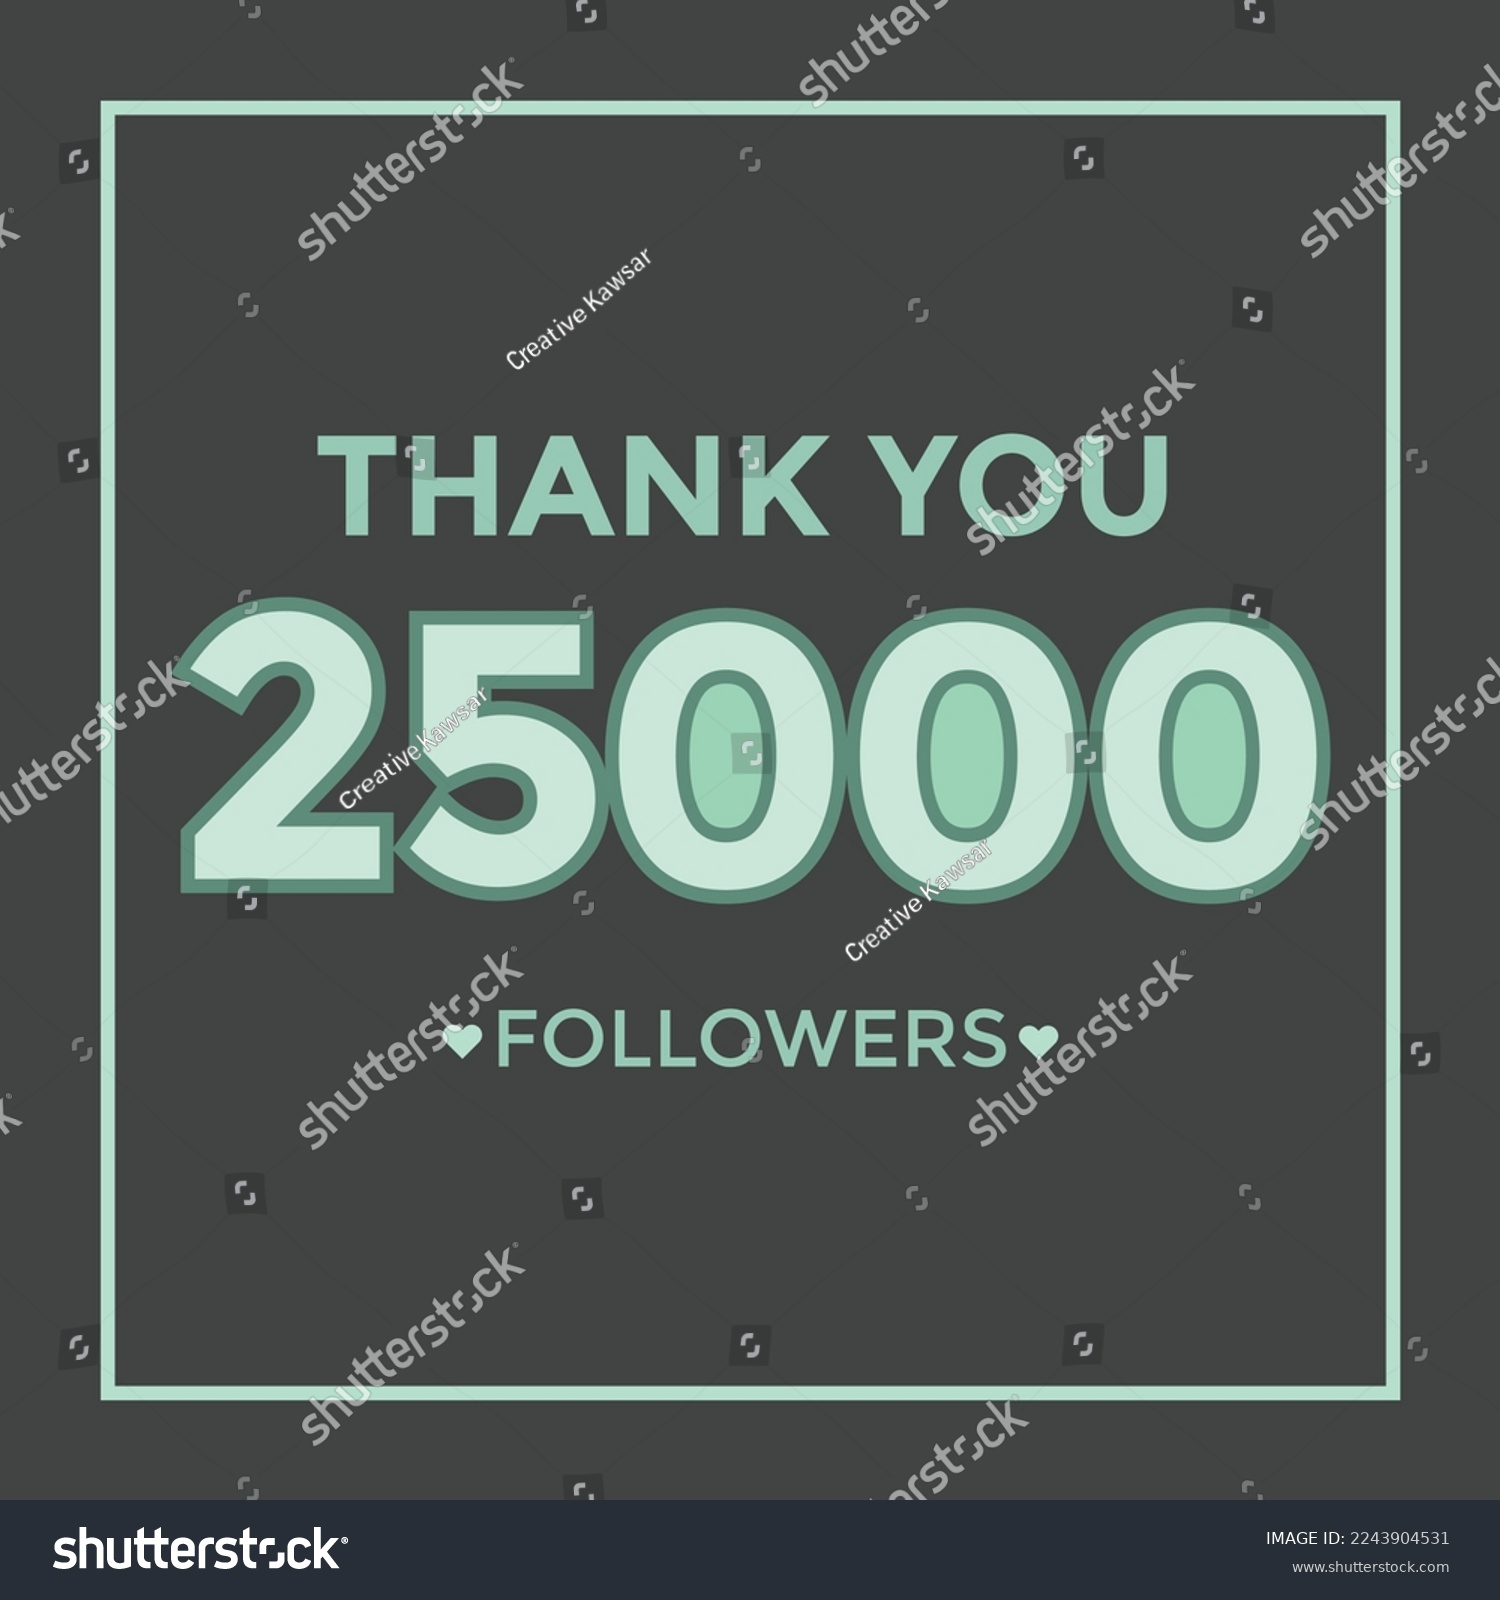 SVG of Thank you design Greeting card template for social networks followers, subscribers, like. 25000 followers. 25k followers celebration svg